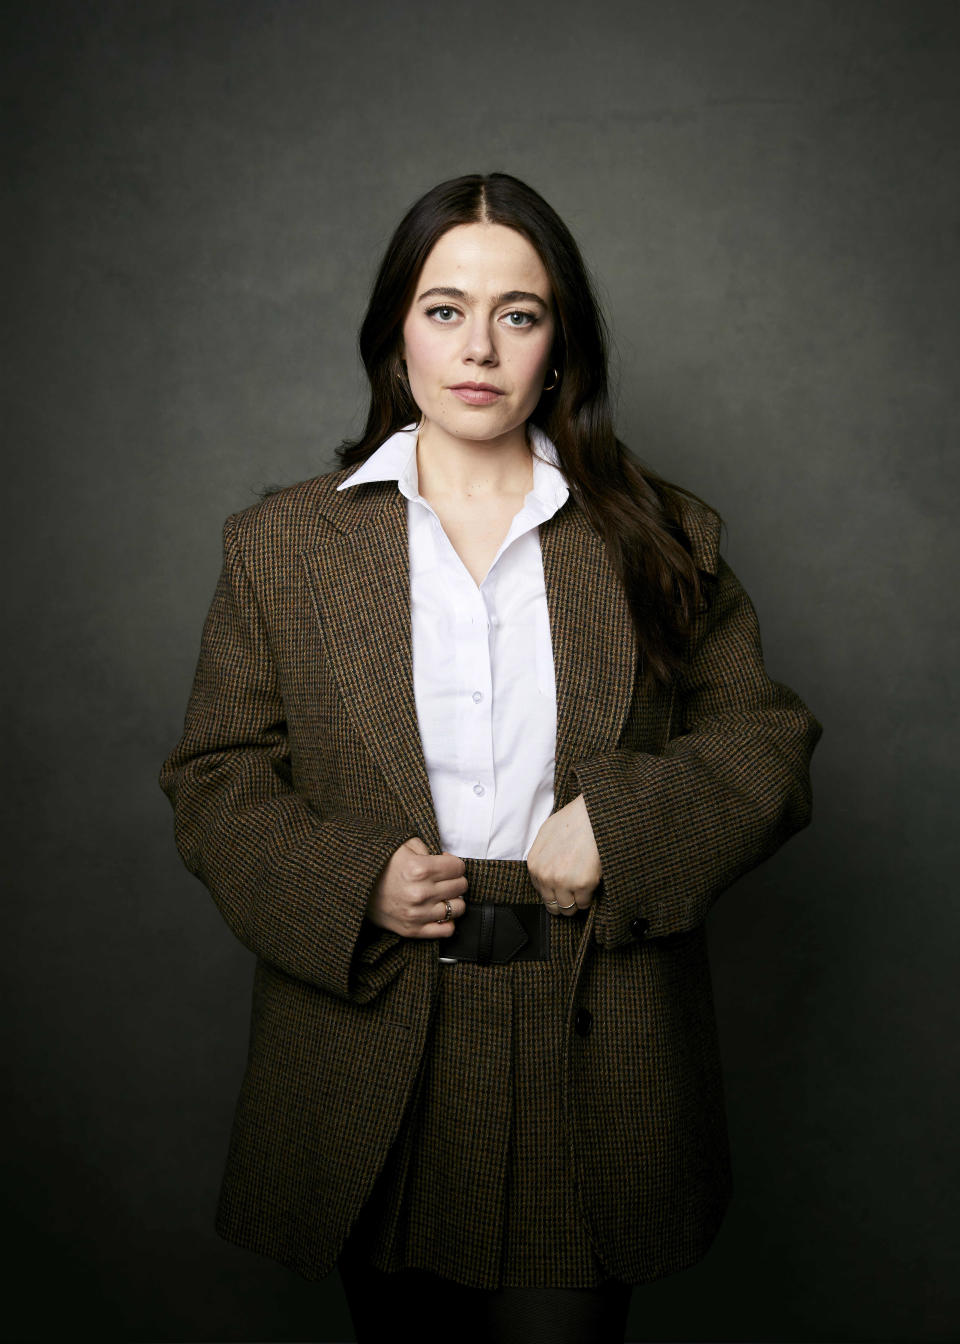 Co-director and actor Molly Gordon poses for a portrait to promote the film "Theater Camp" during the Sundance Film Festival on Friday, Jan. 20, 2023, in Park City, Utah. (Photo by Taylor Jewell/Invision/AP)